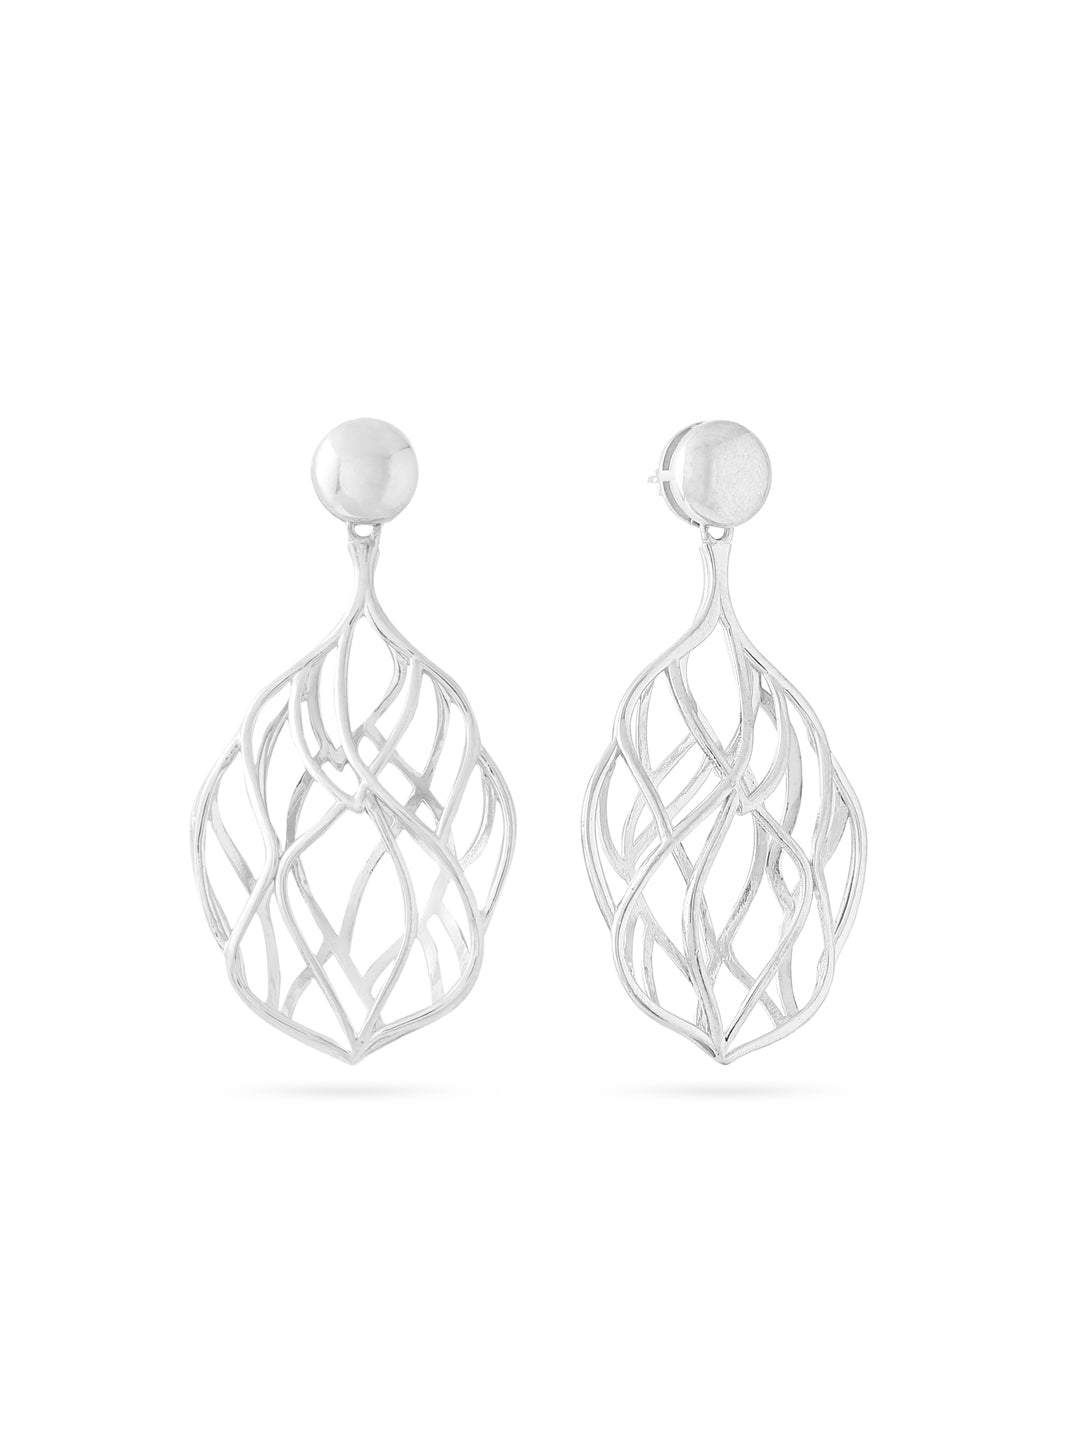 925 Sterling Silver Nature's Inspired Lumina Collection Earrings